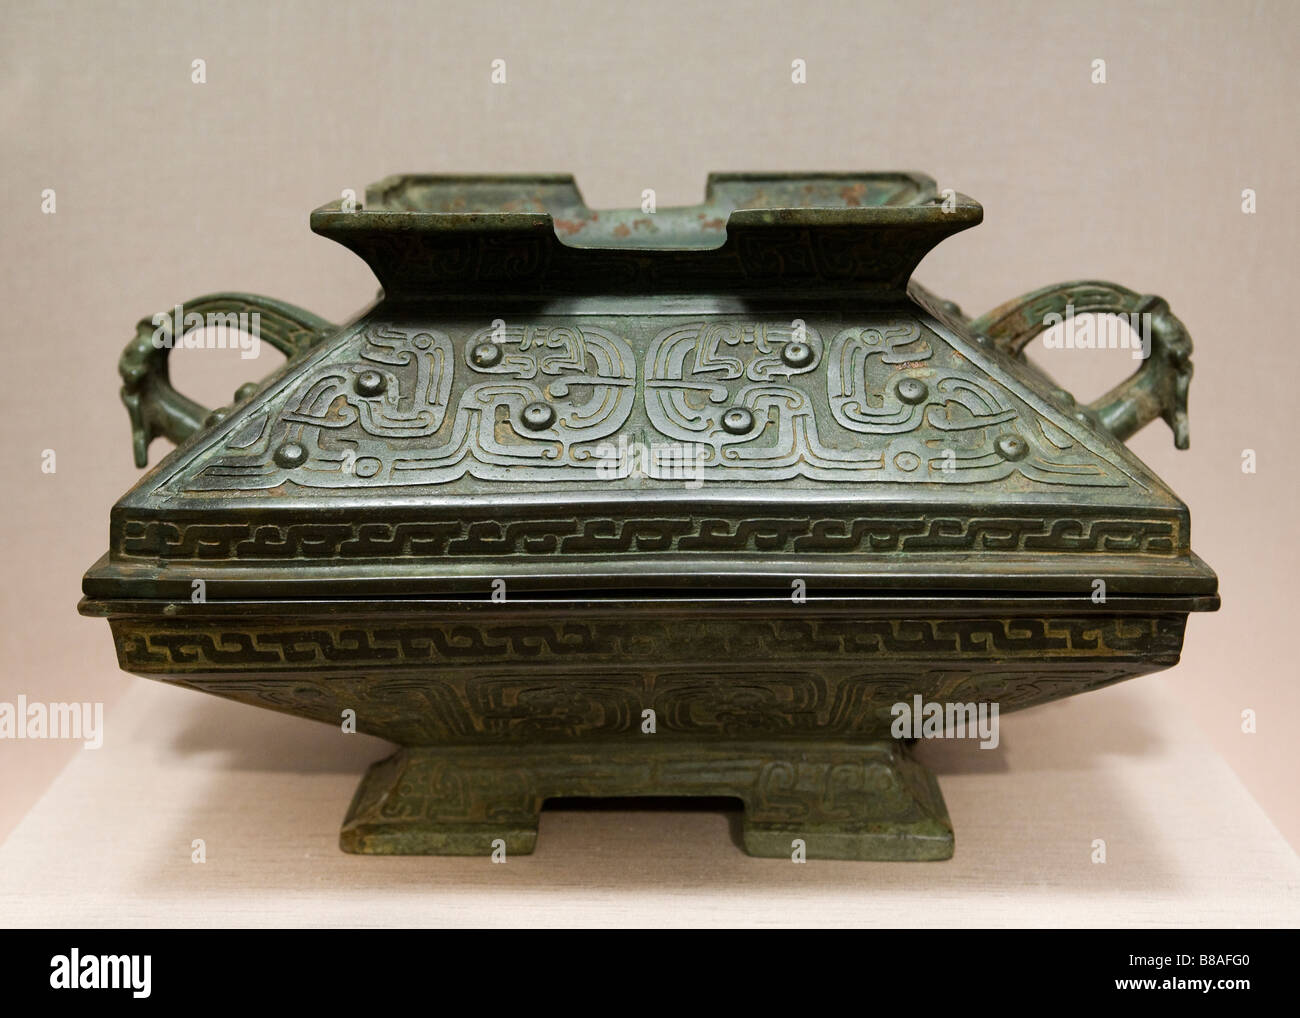 Bronze Ritual container - China, Eastern Zhou dynasty 8th century B.C. Stock Photo